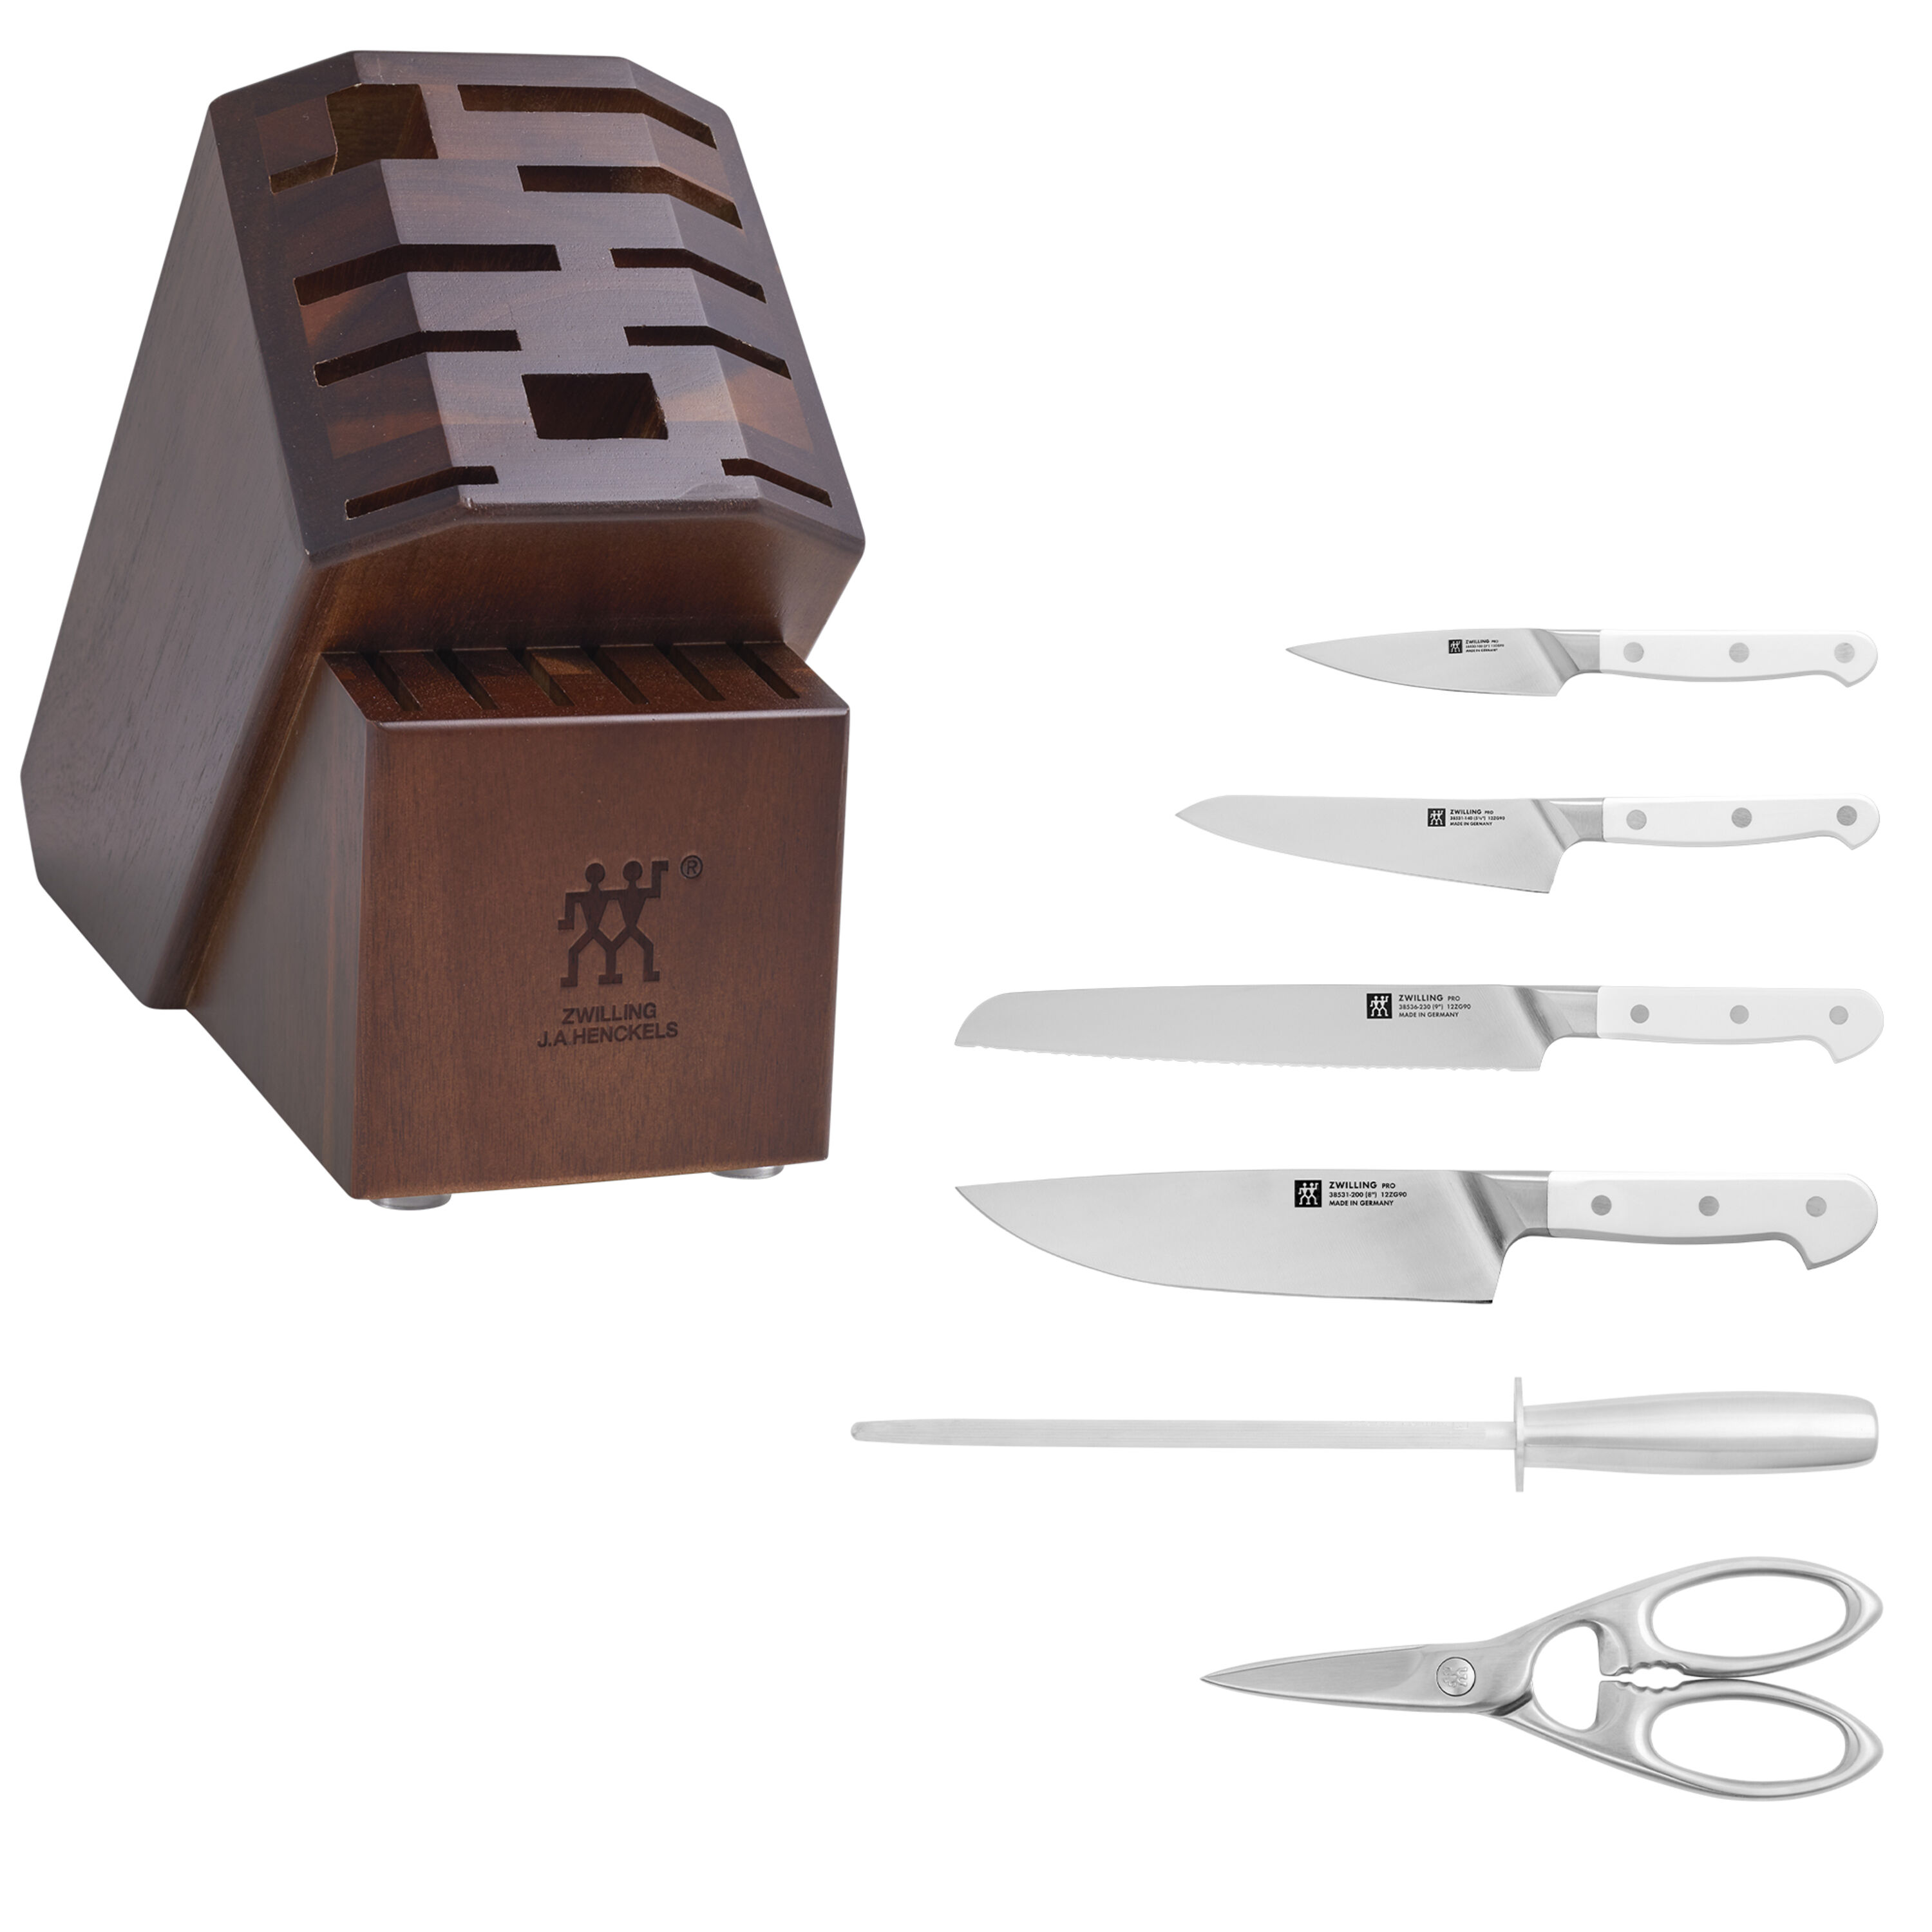 ZWILLING Pro le blanc 7-pc, Block Set With Acacia Block, Silver-white